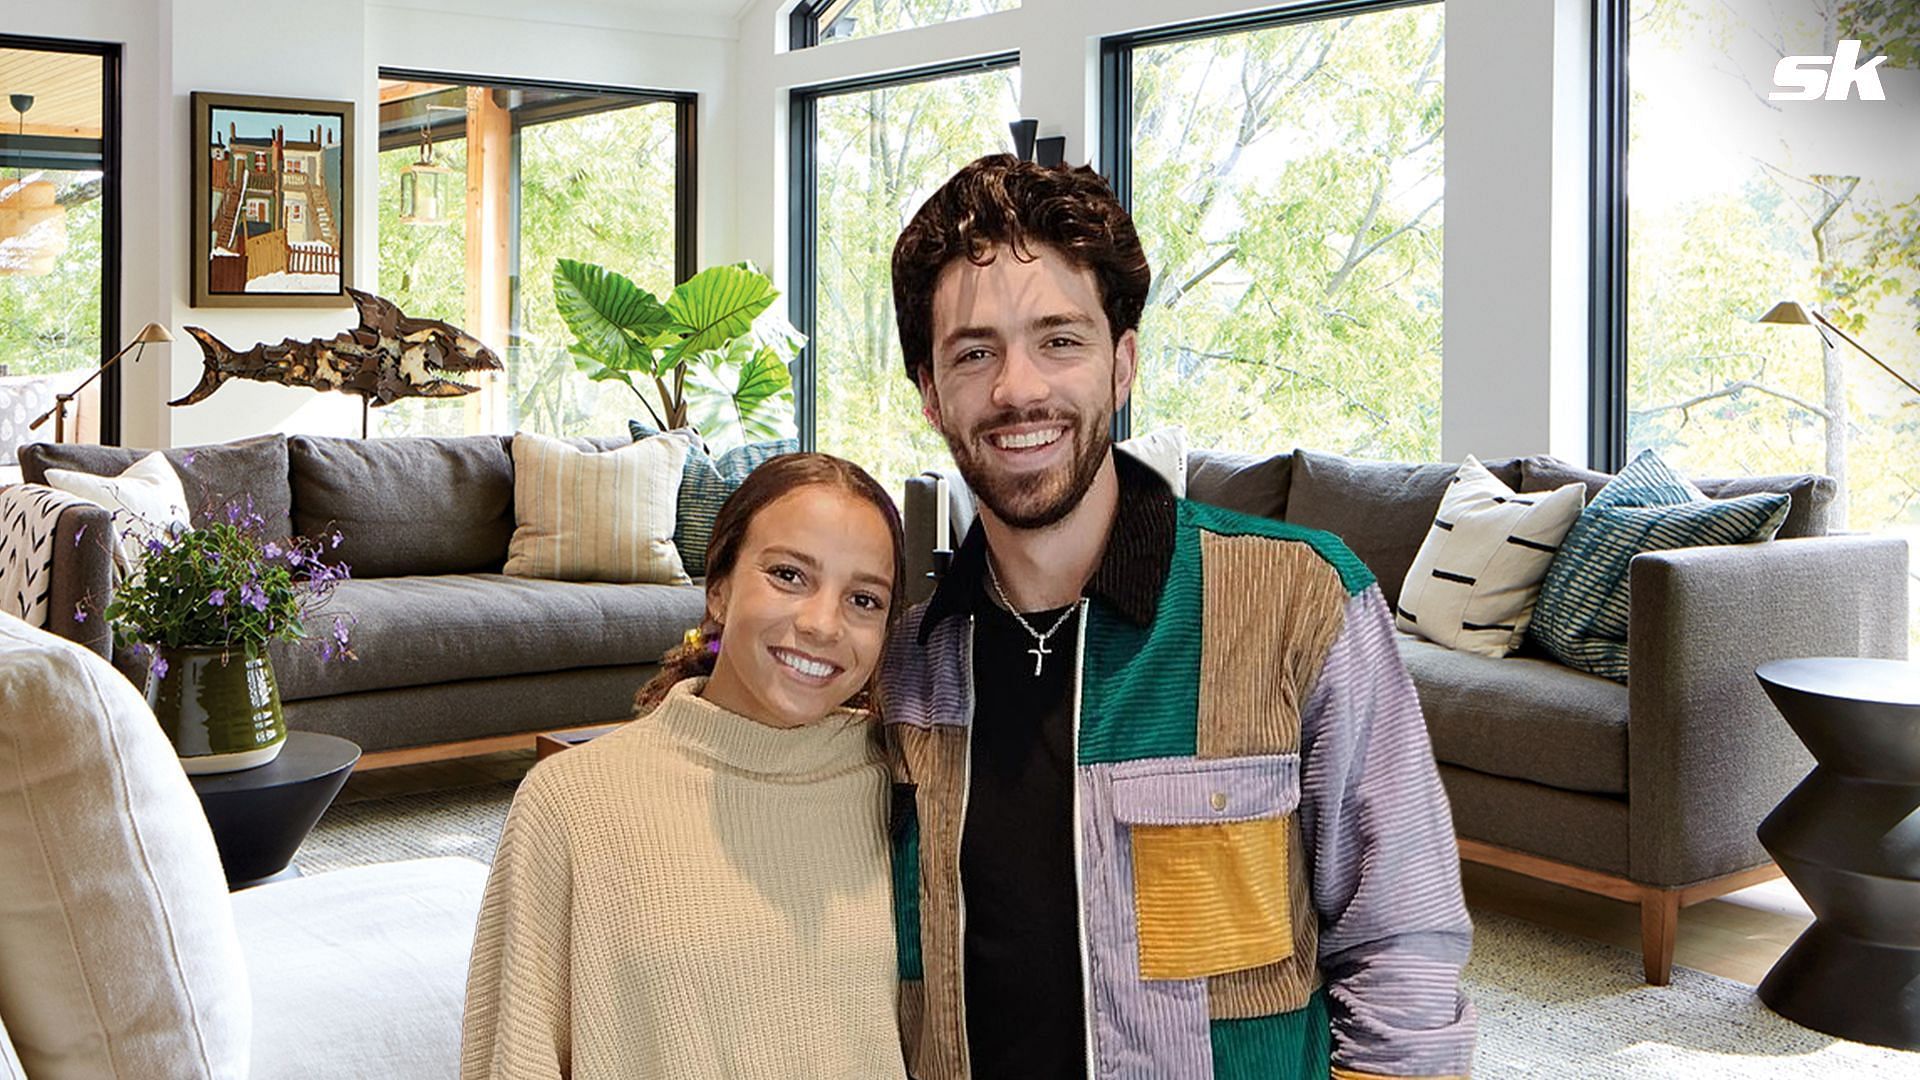 Cubs shortstop Dansby Swanson and wife Mallory Pugh purchased